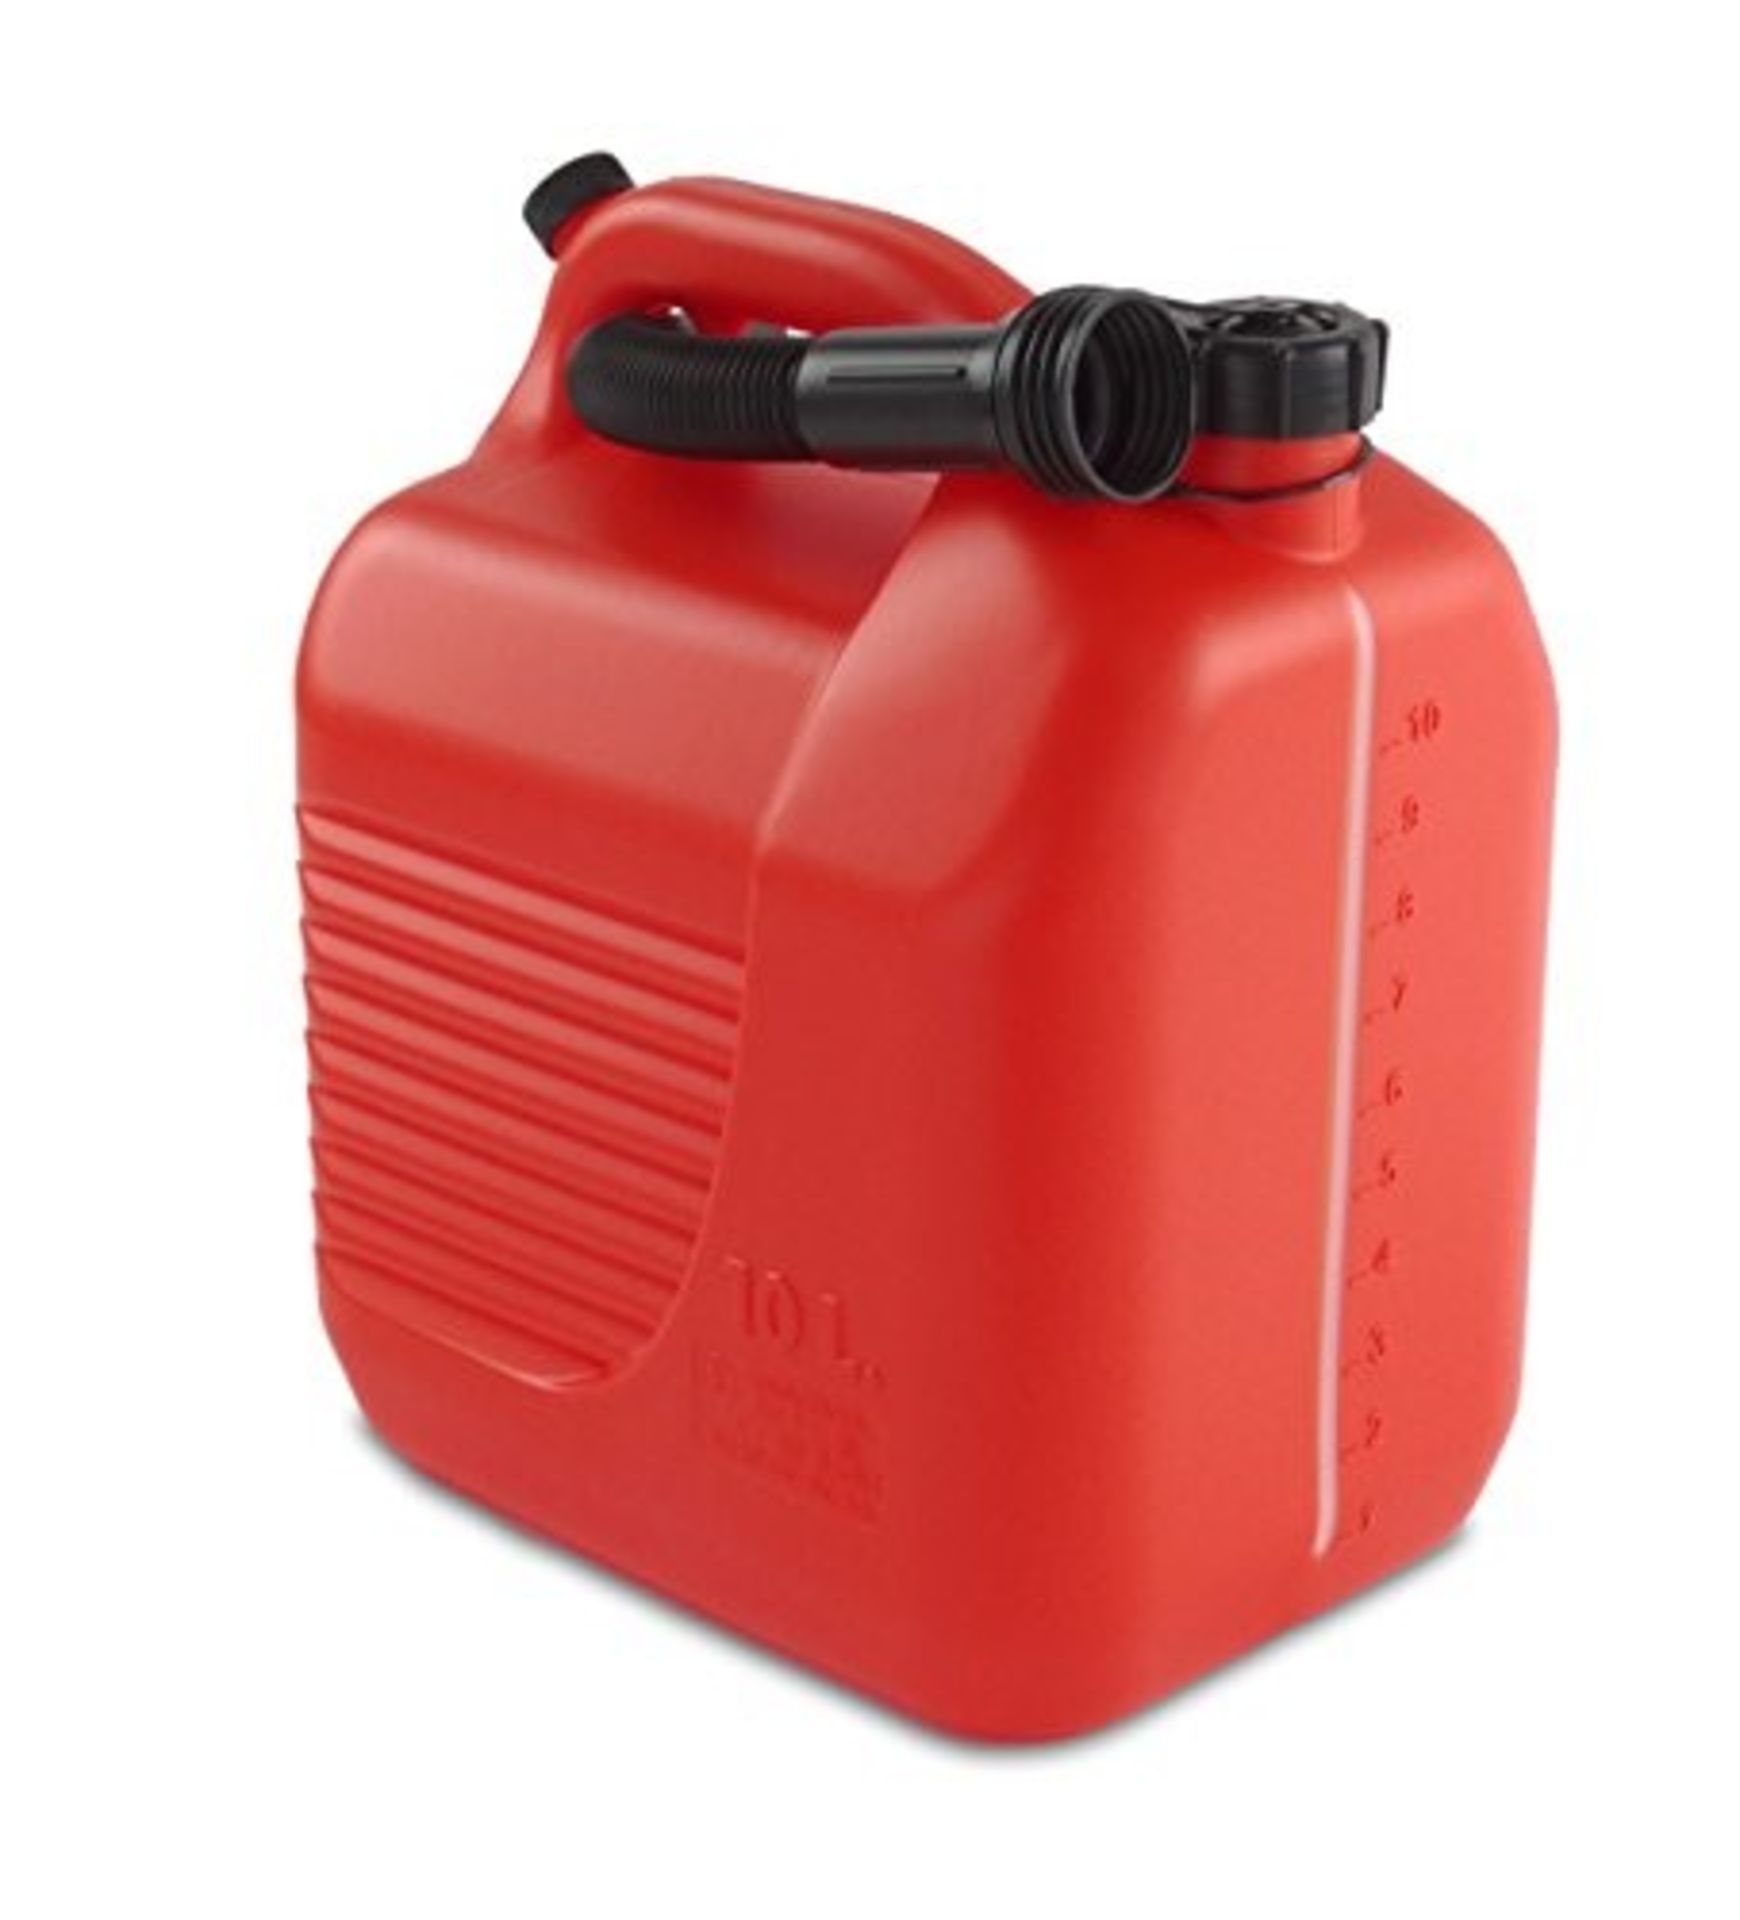 Tayg 602351 Jerrycan with Pouring spout 10L, Red, 10